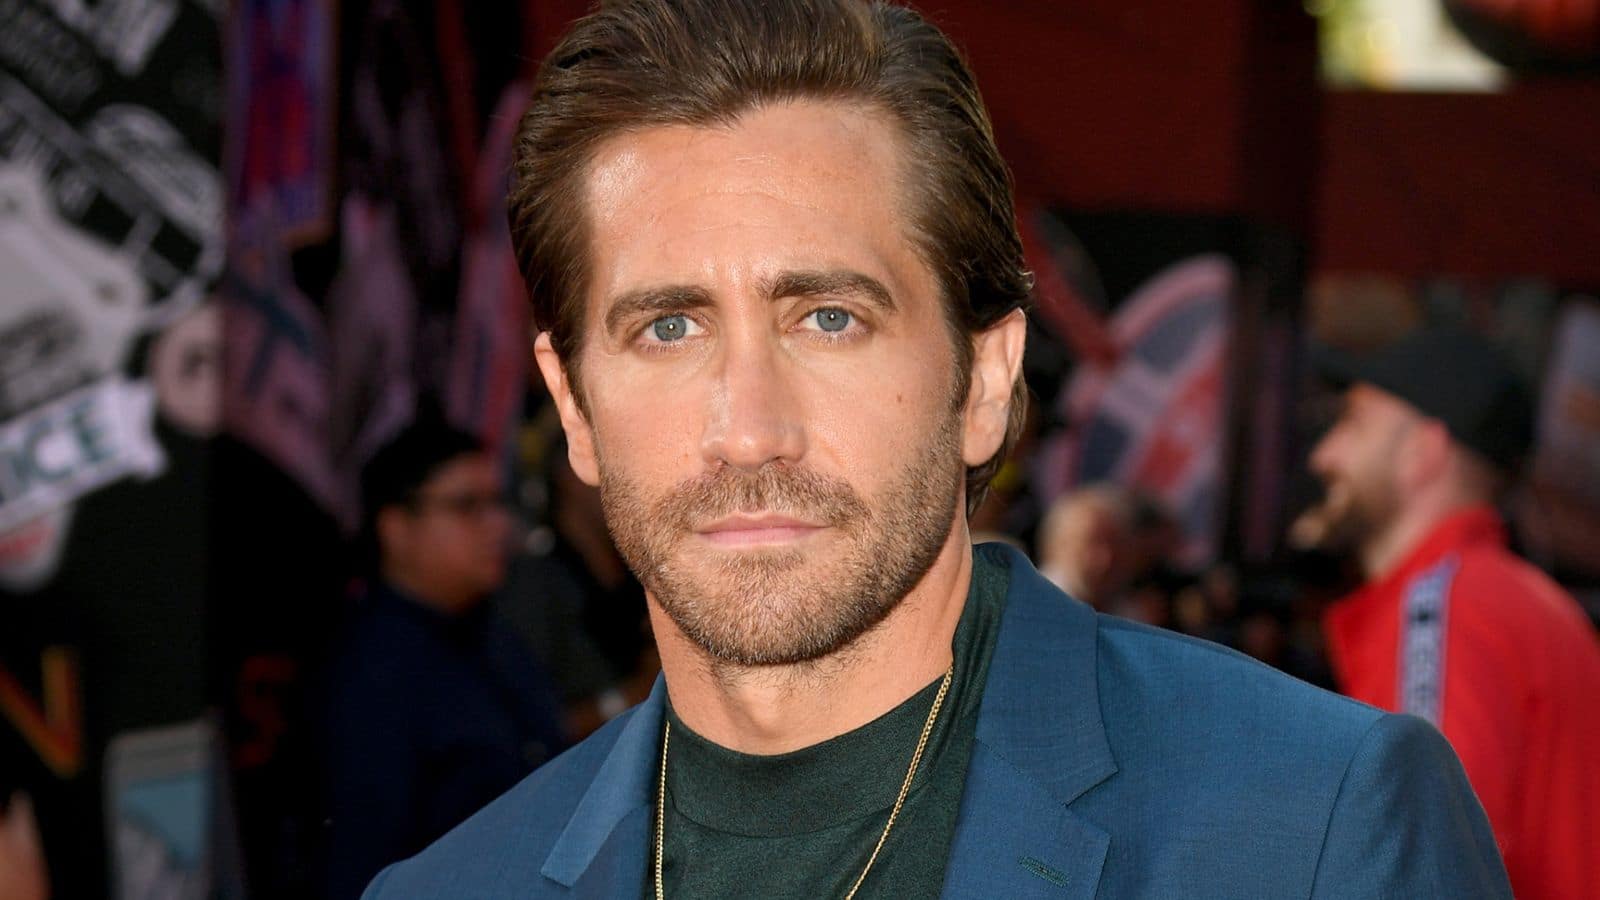 'Never known anything else': Jake Gyllenhaal on his legal blindness 